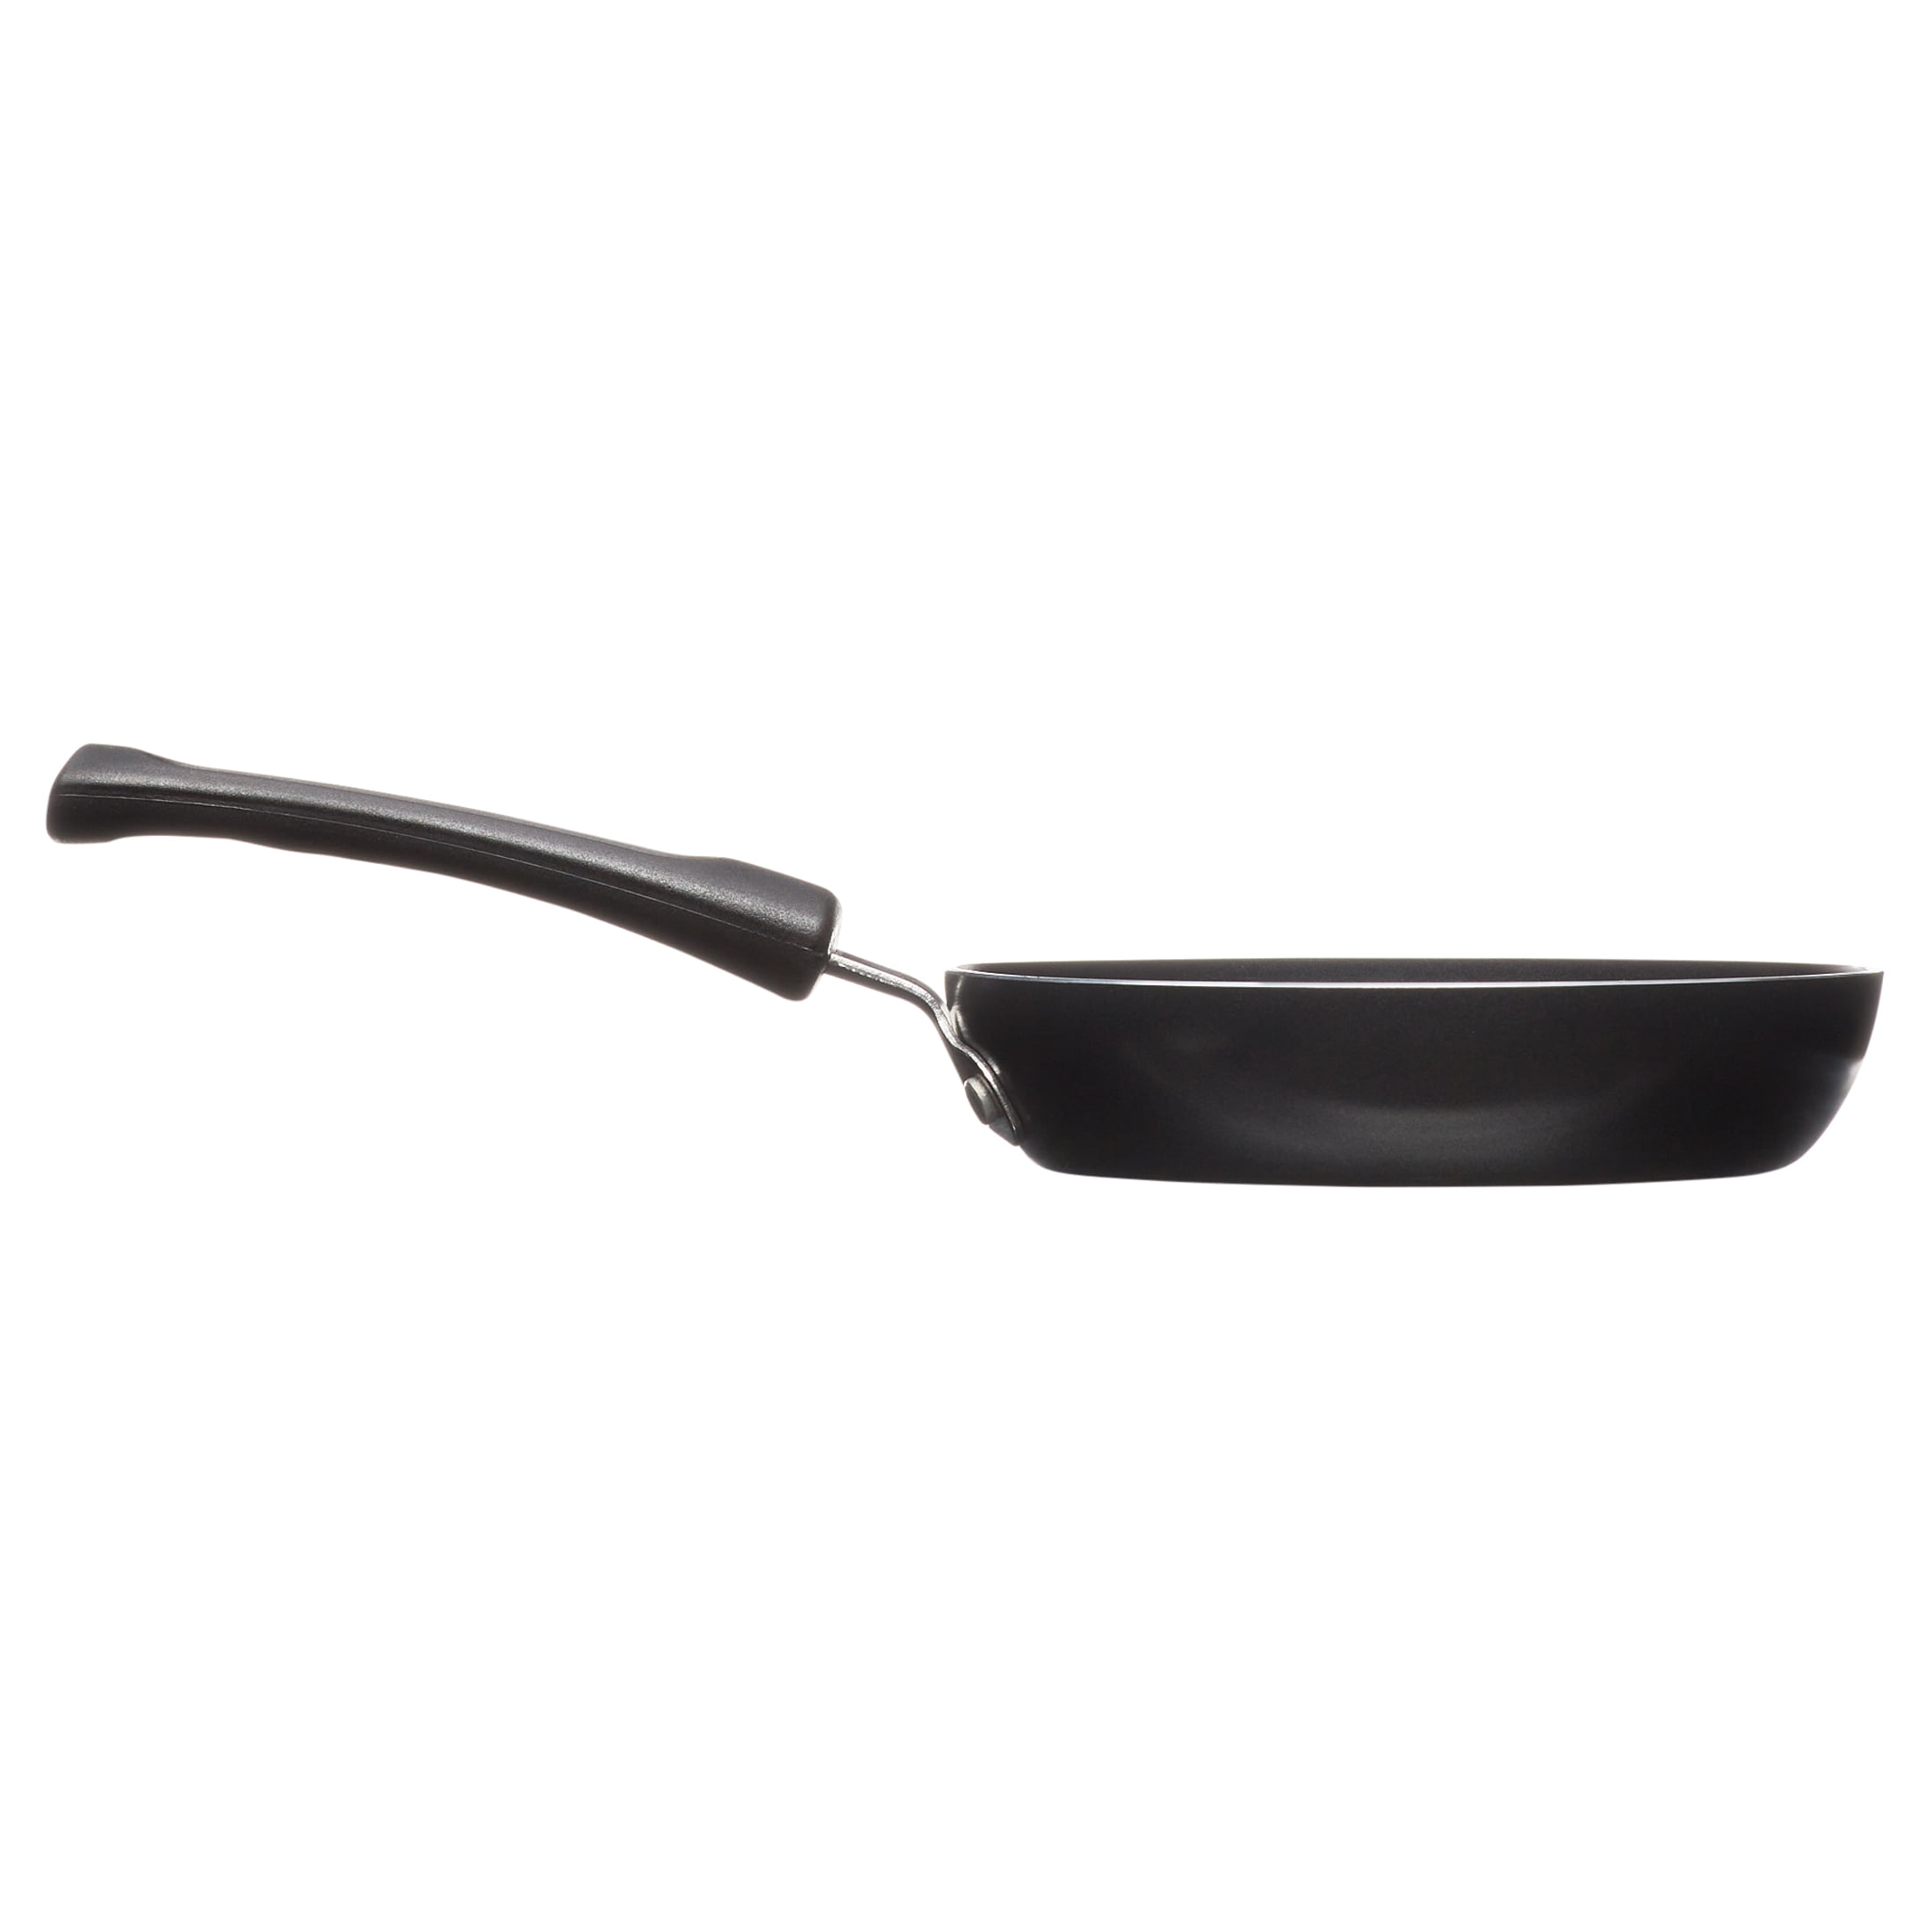 T-FAL T-fal Easy Care Non-Stick 4.7” One Egg Wonder with Lid, Black B0491264